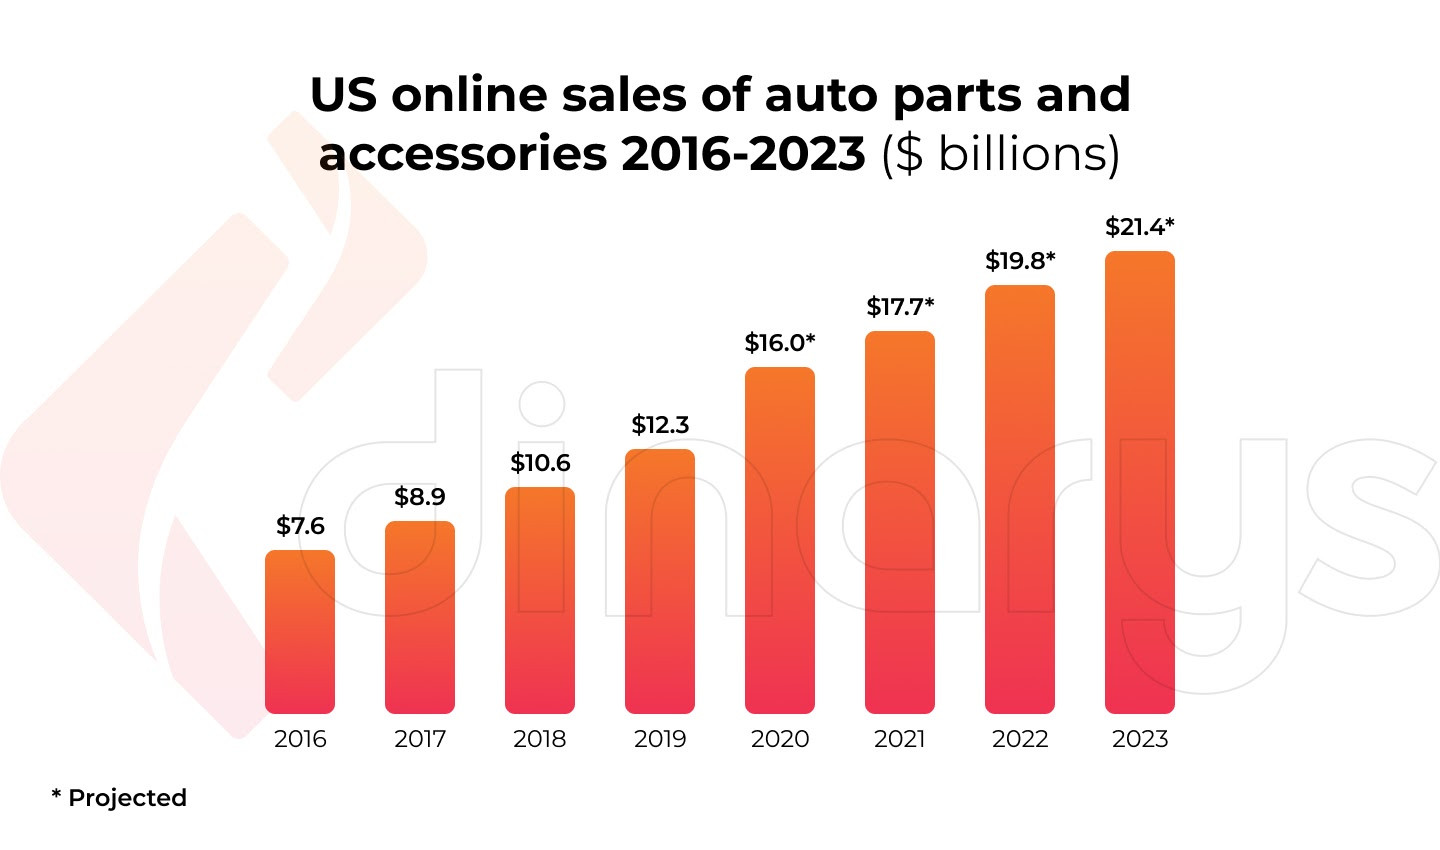 Obviously, online sales of auto parts in the U.S